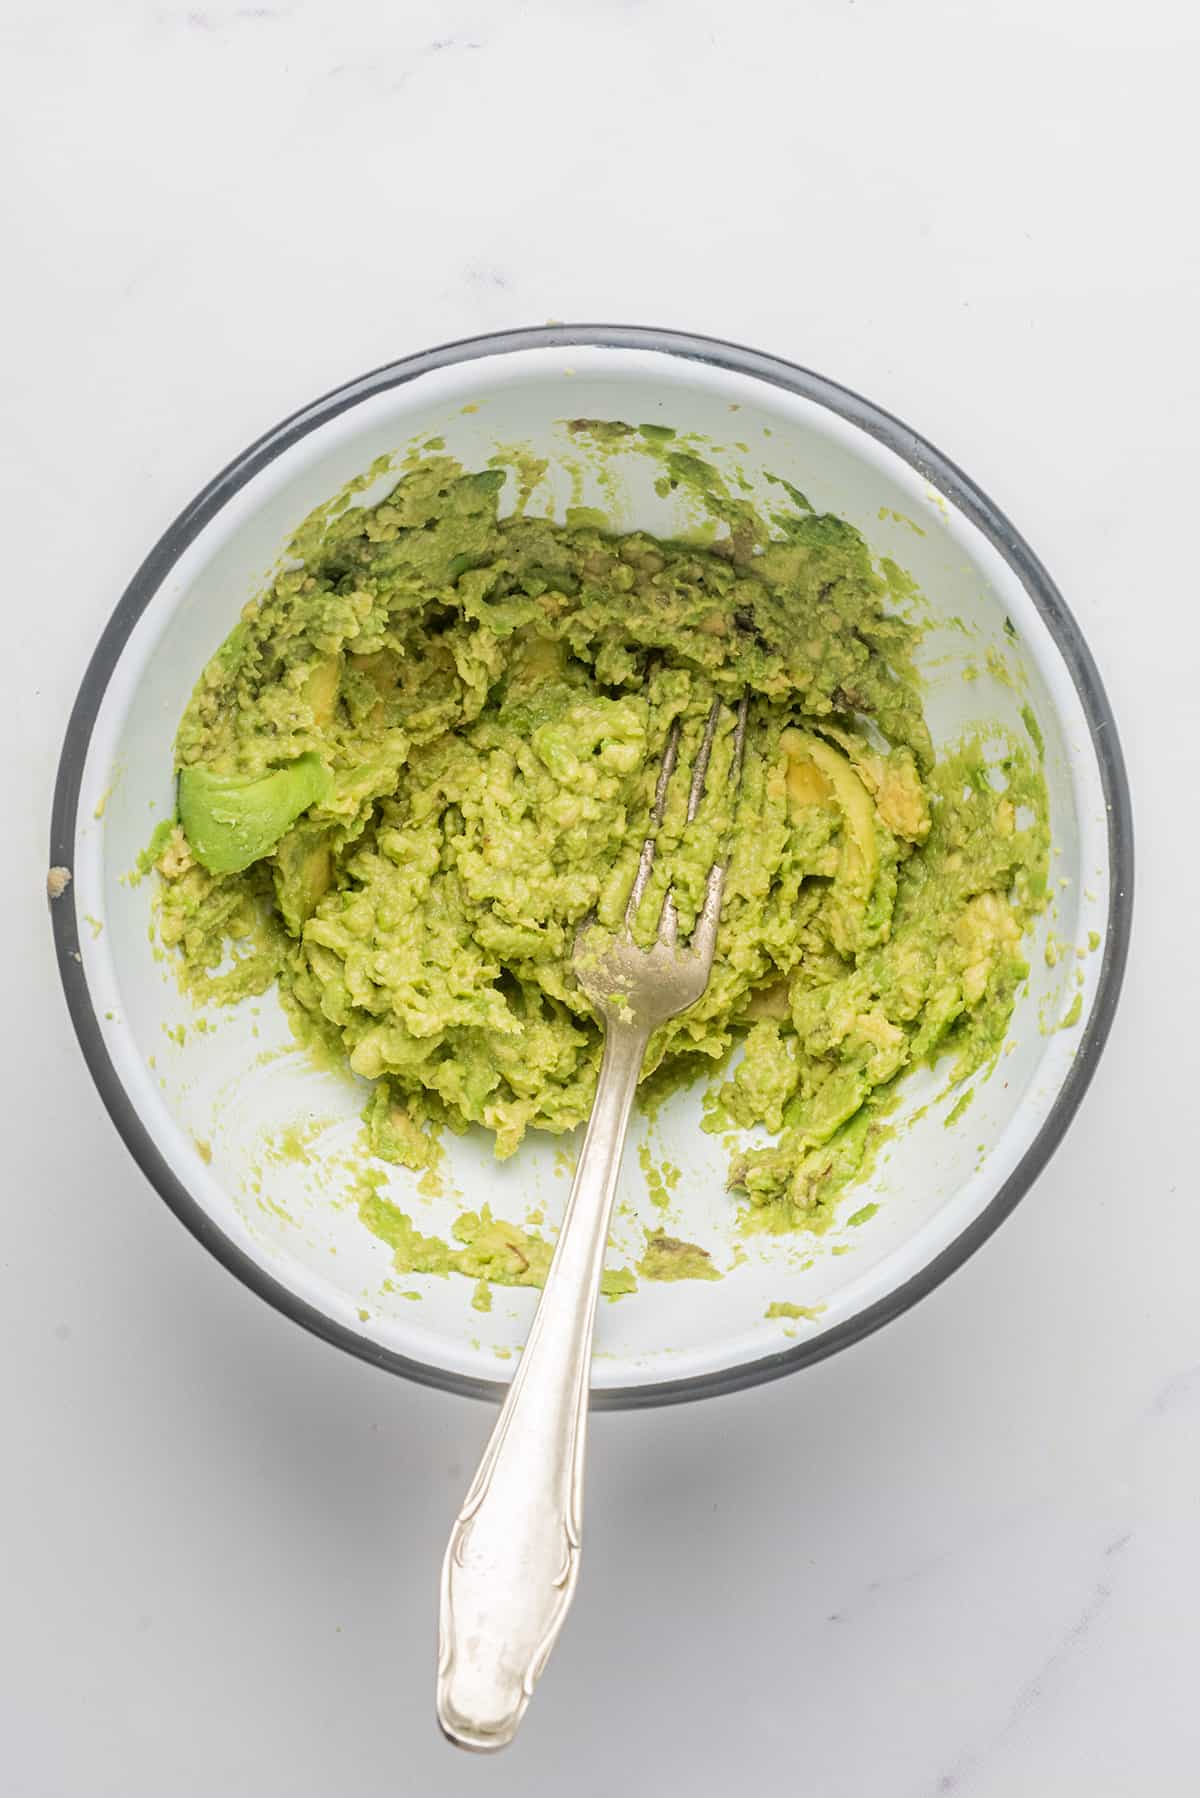 Mashing avocado with a fork in a bowl.